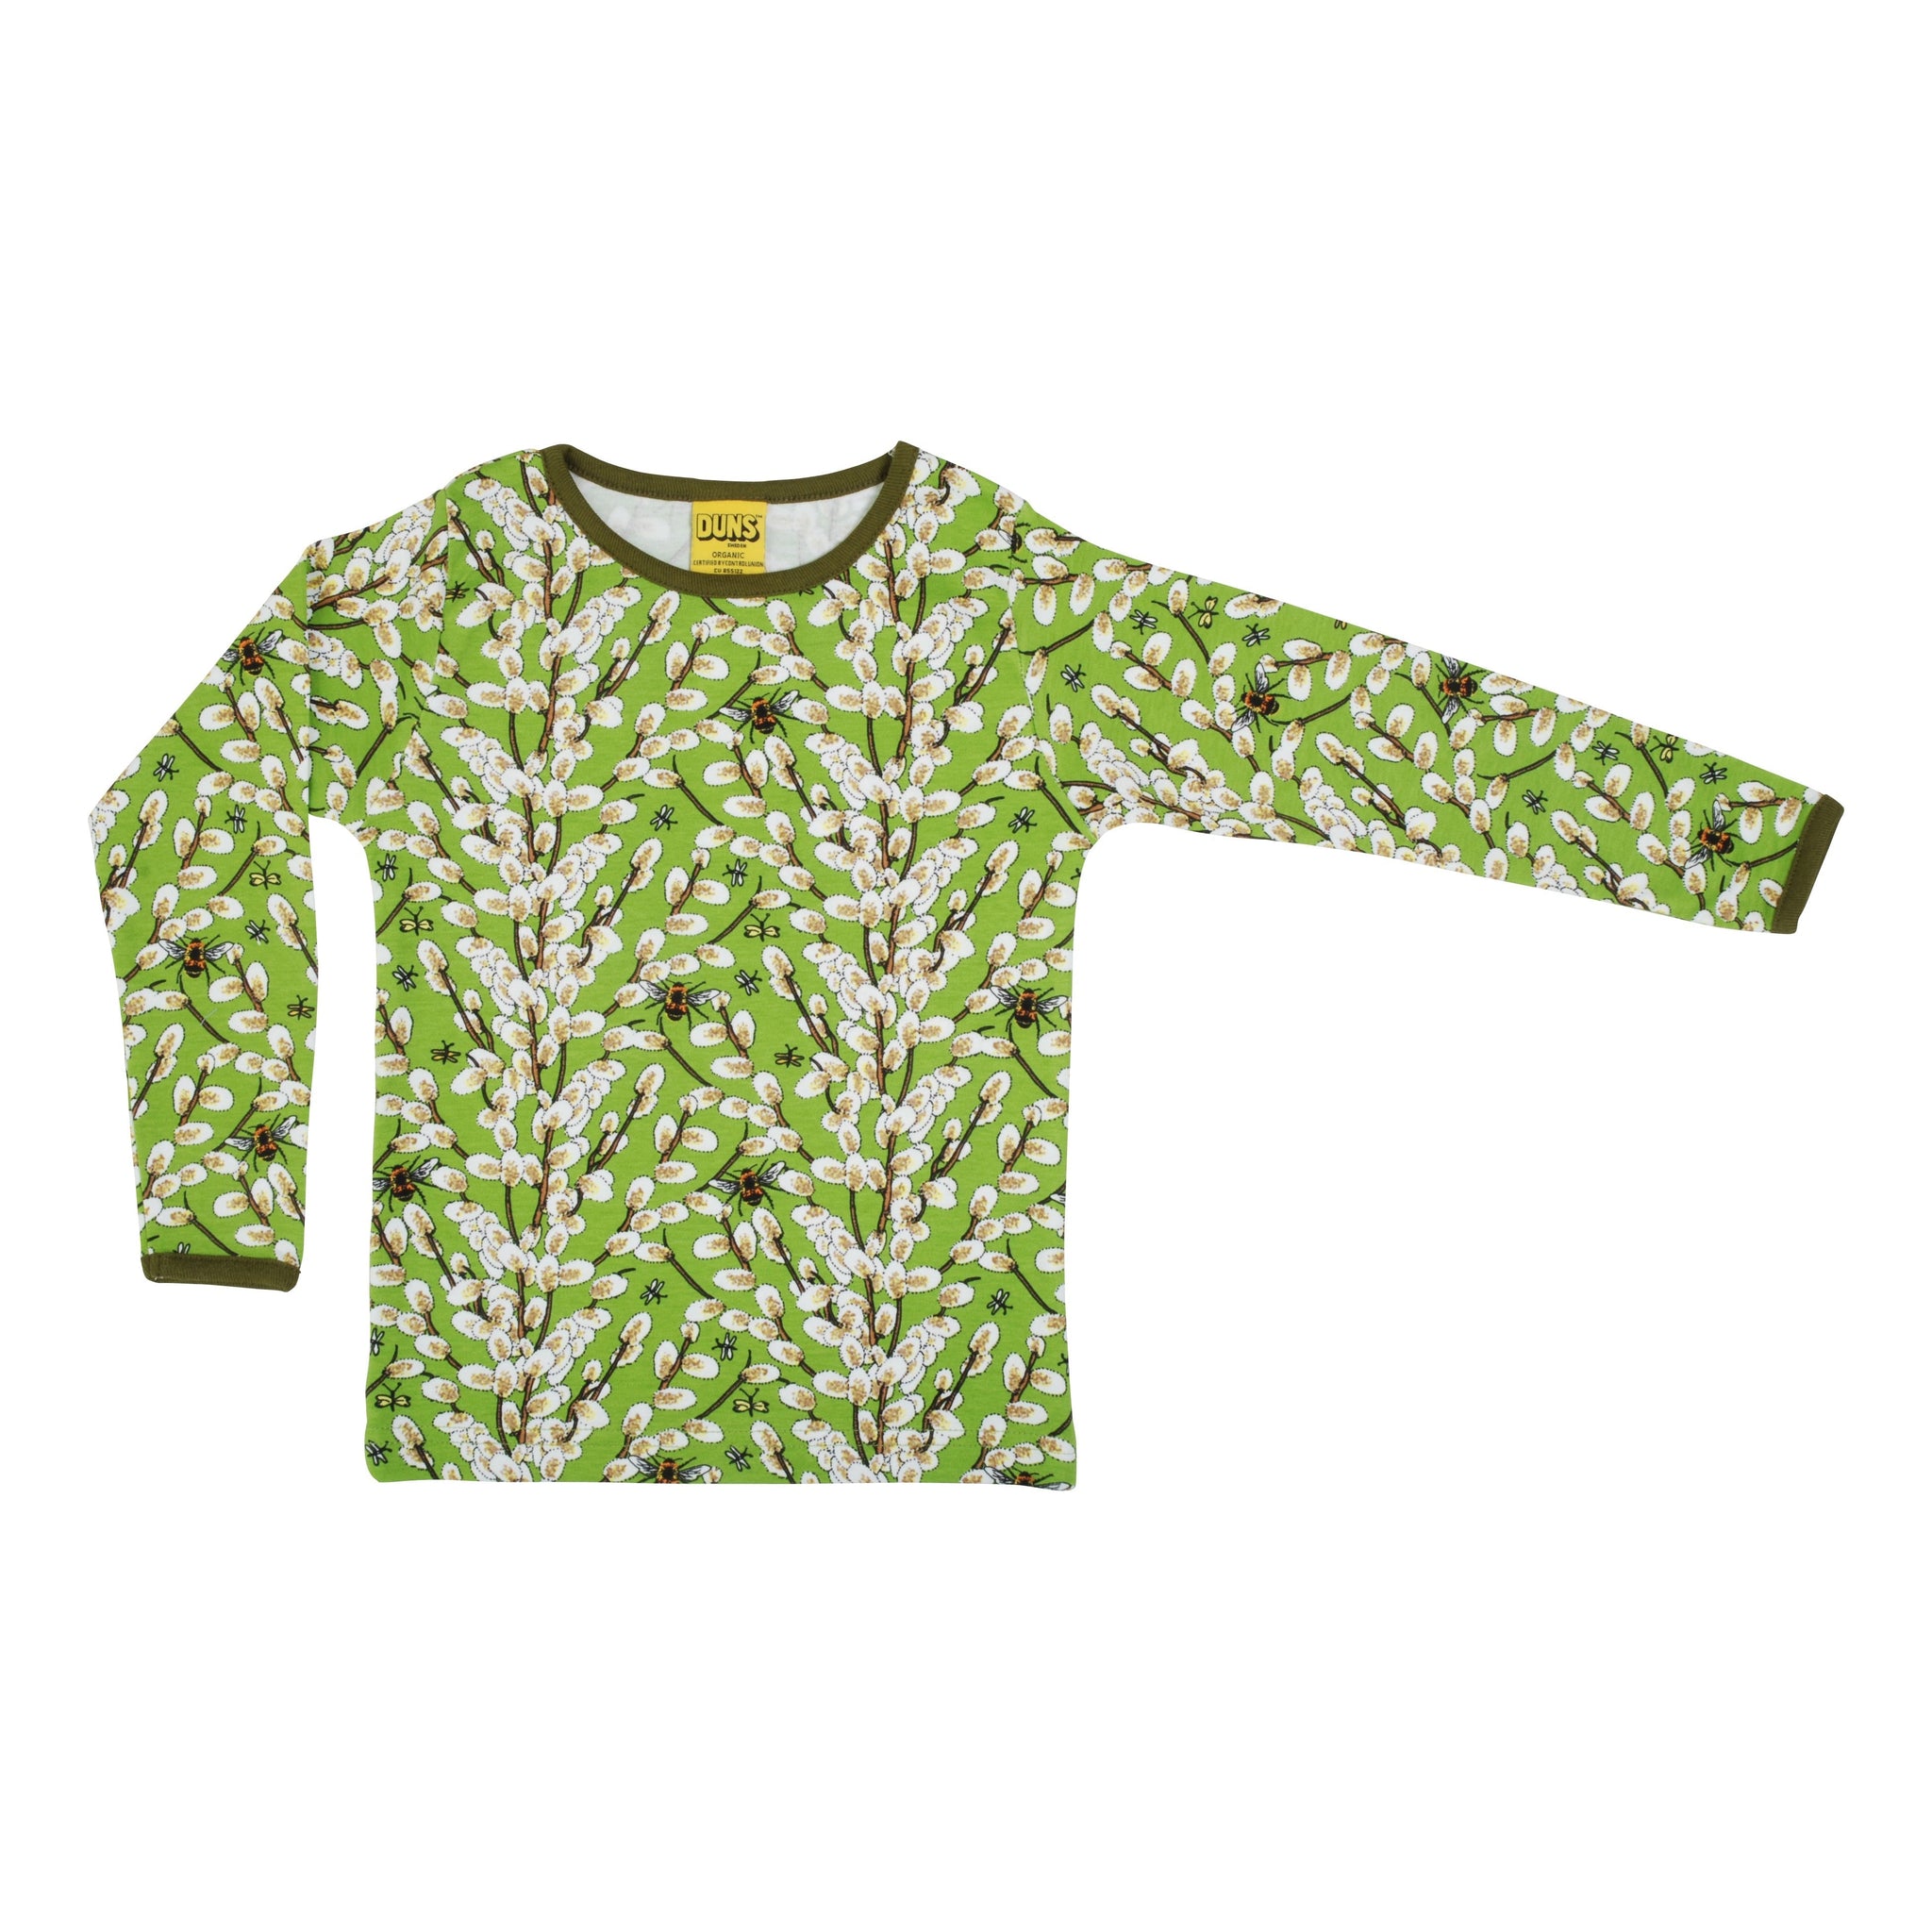 DUNS Sweden - Willow Long Sleeved Top (Greenery) (2 Years)